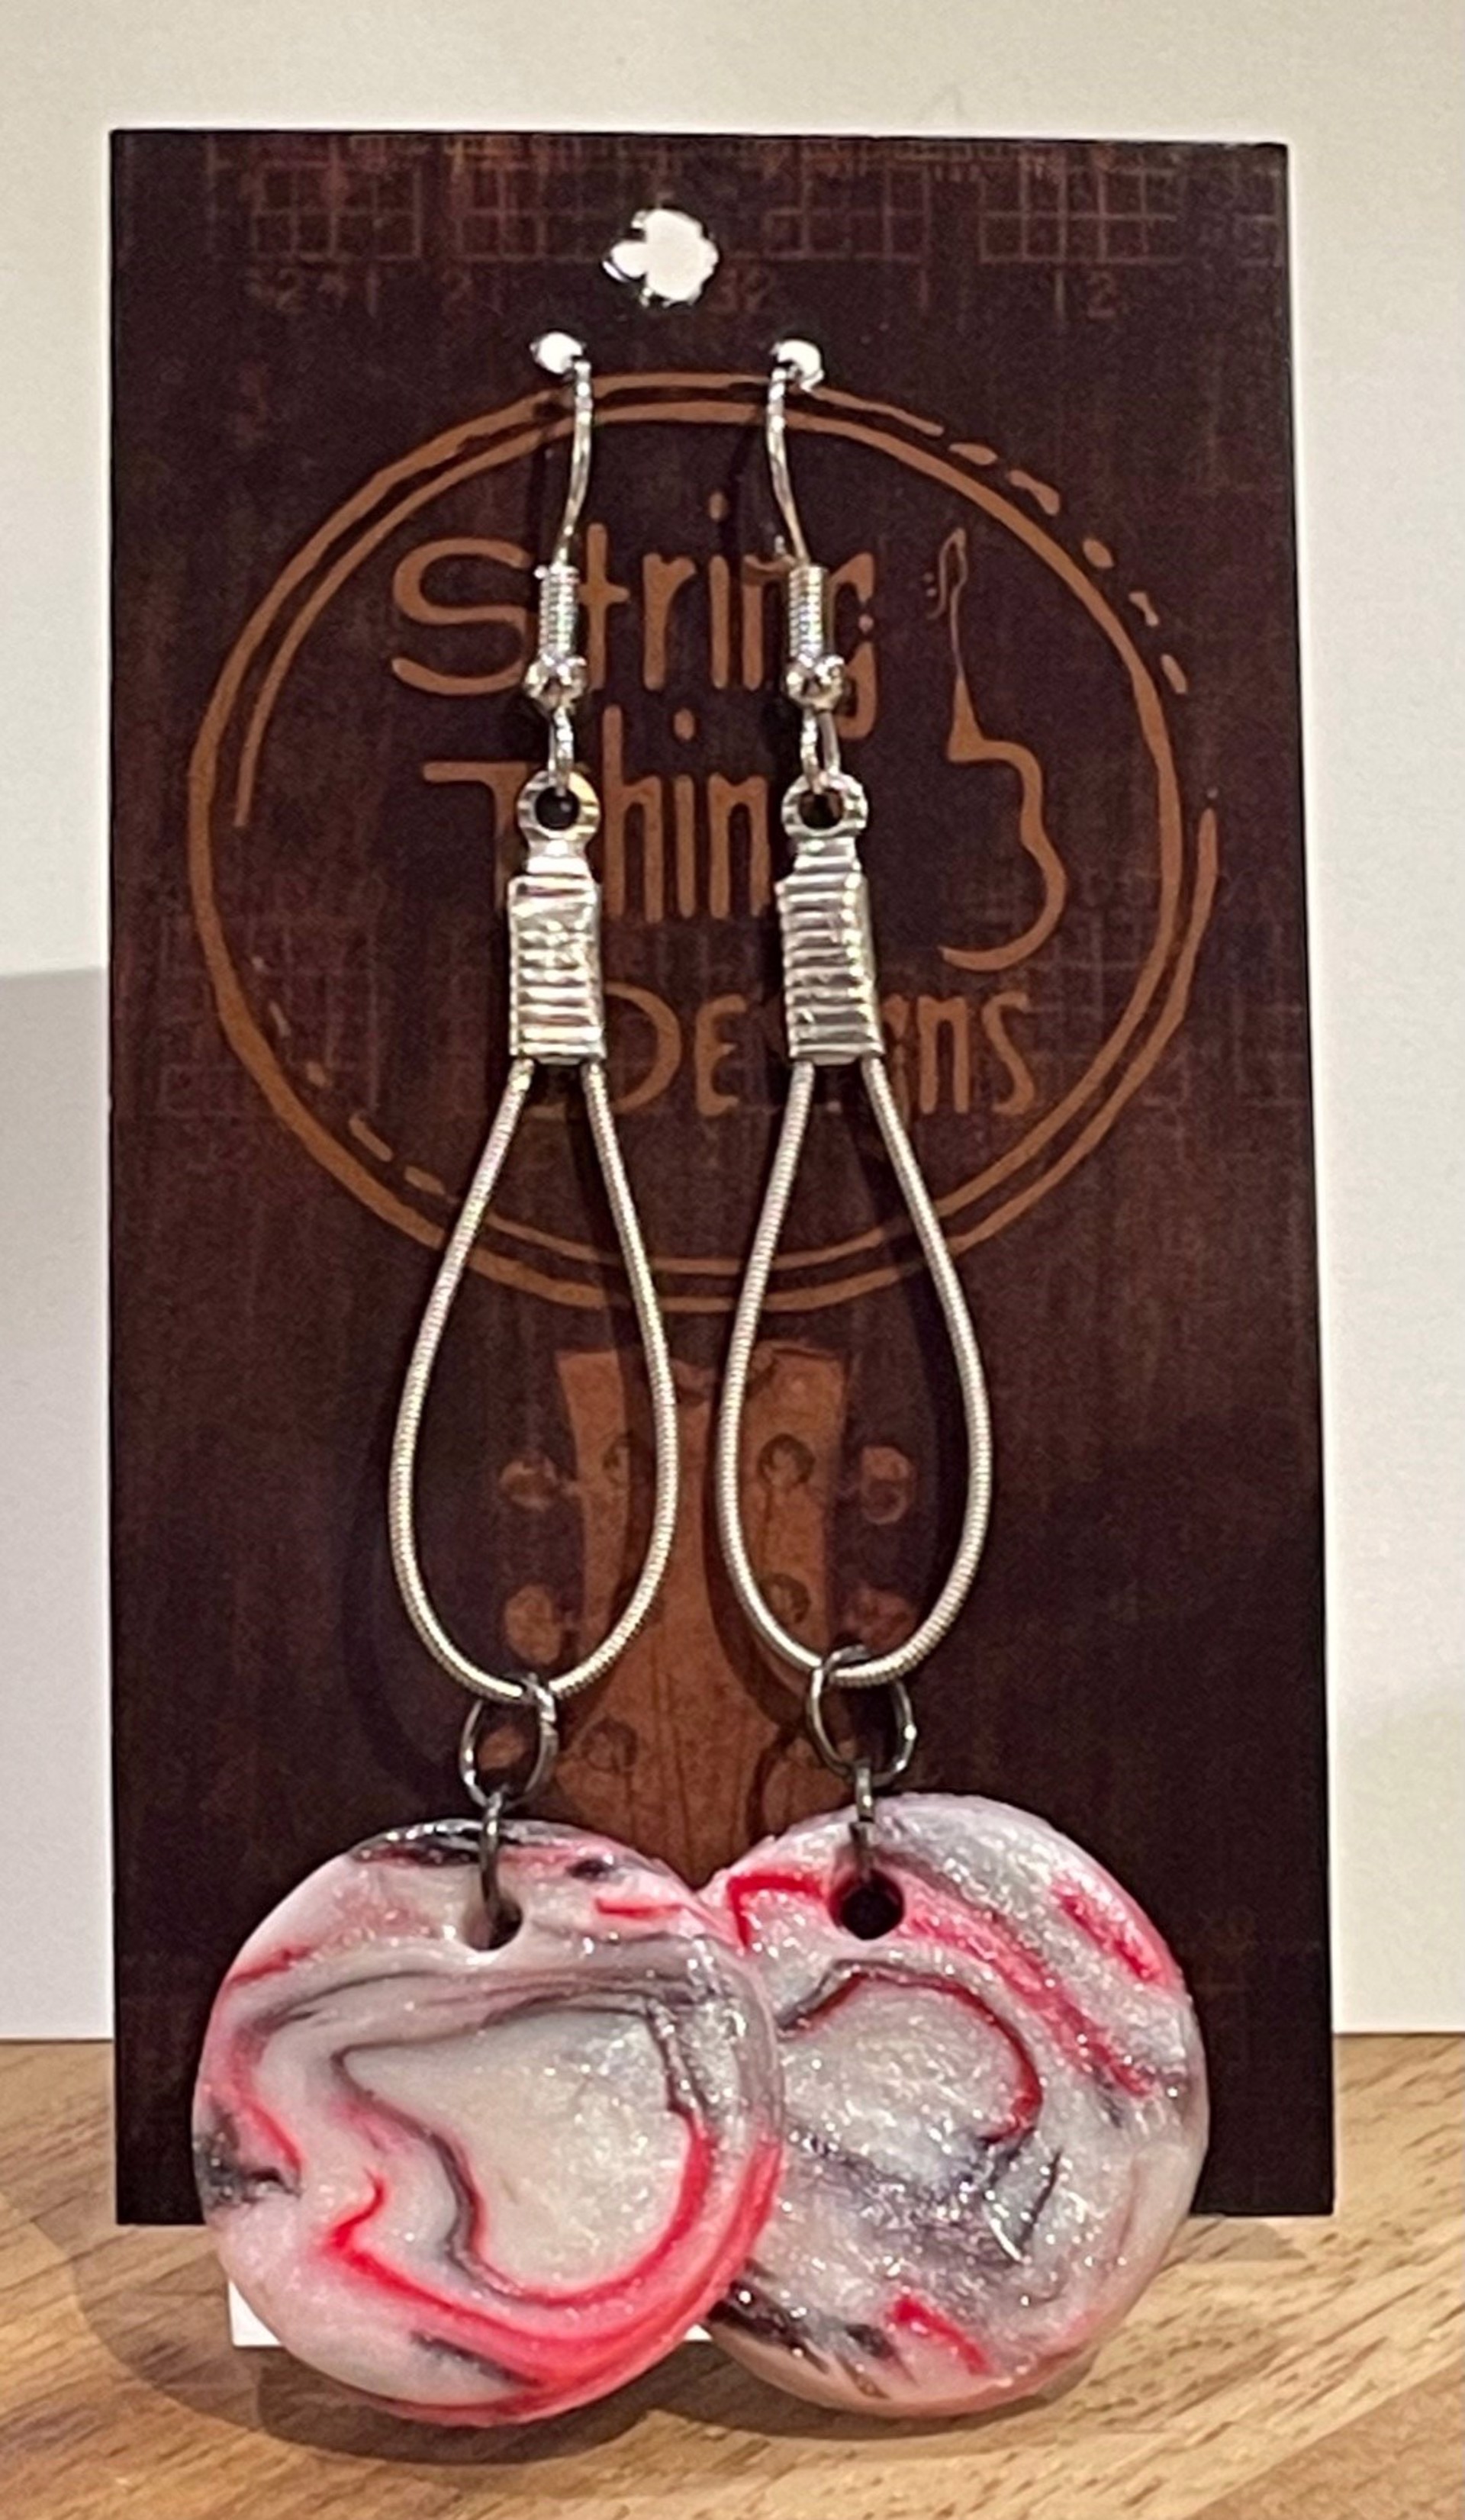 White Round Guitar String Earrings by String Thing Designs